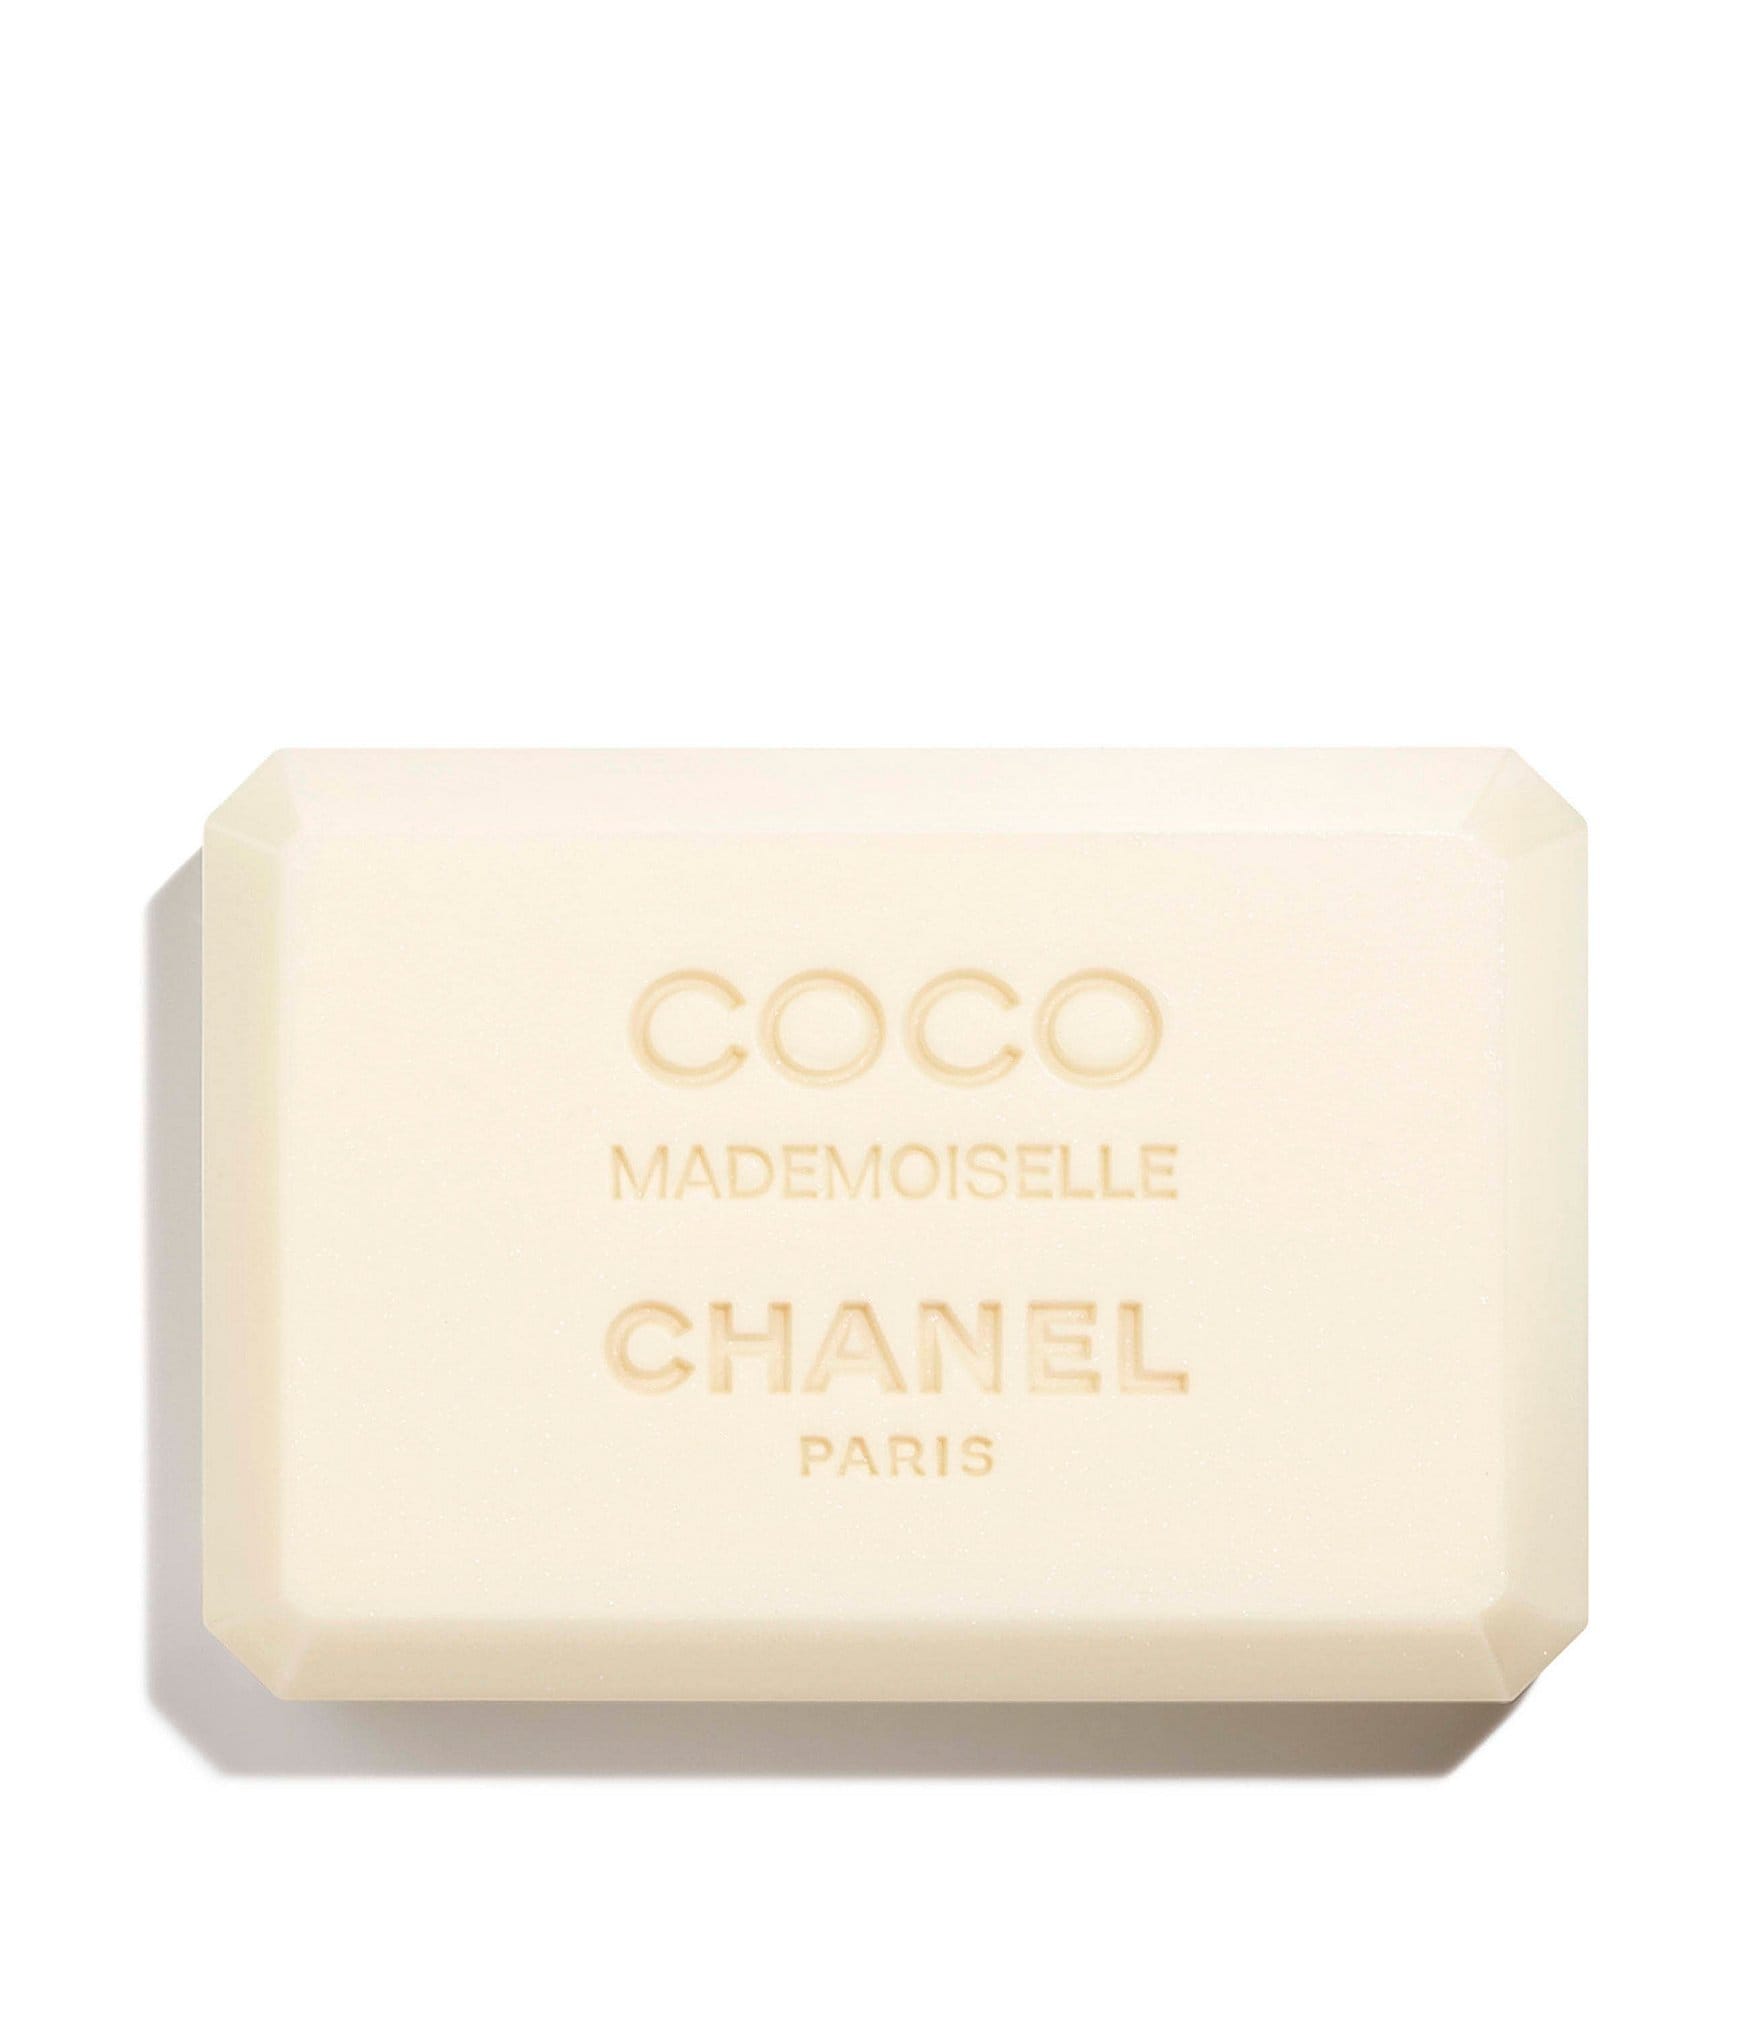 Chanel Coco savon solid toilet soap for women 150 g - VMD